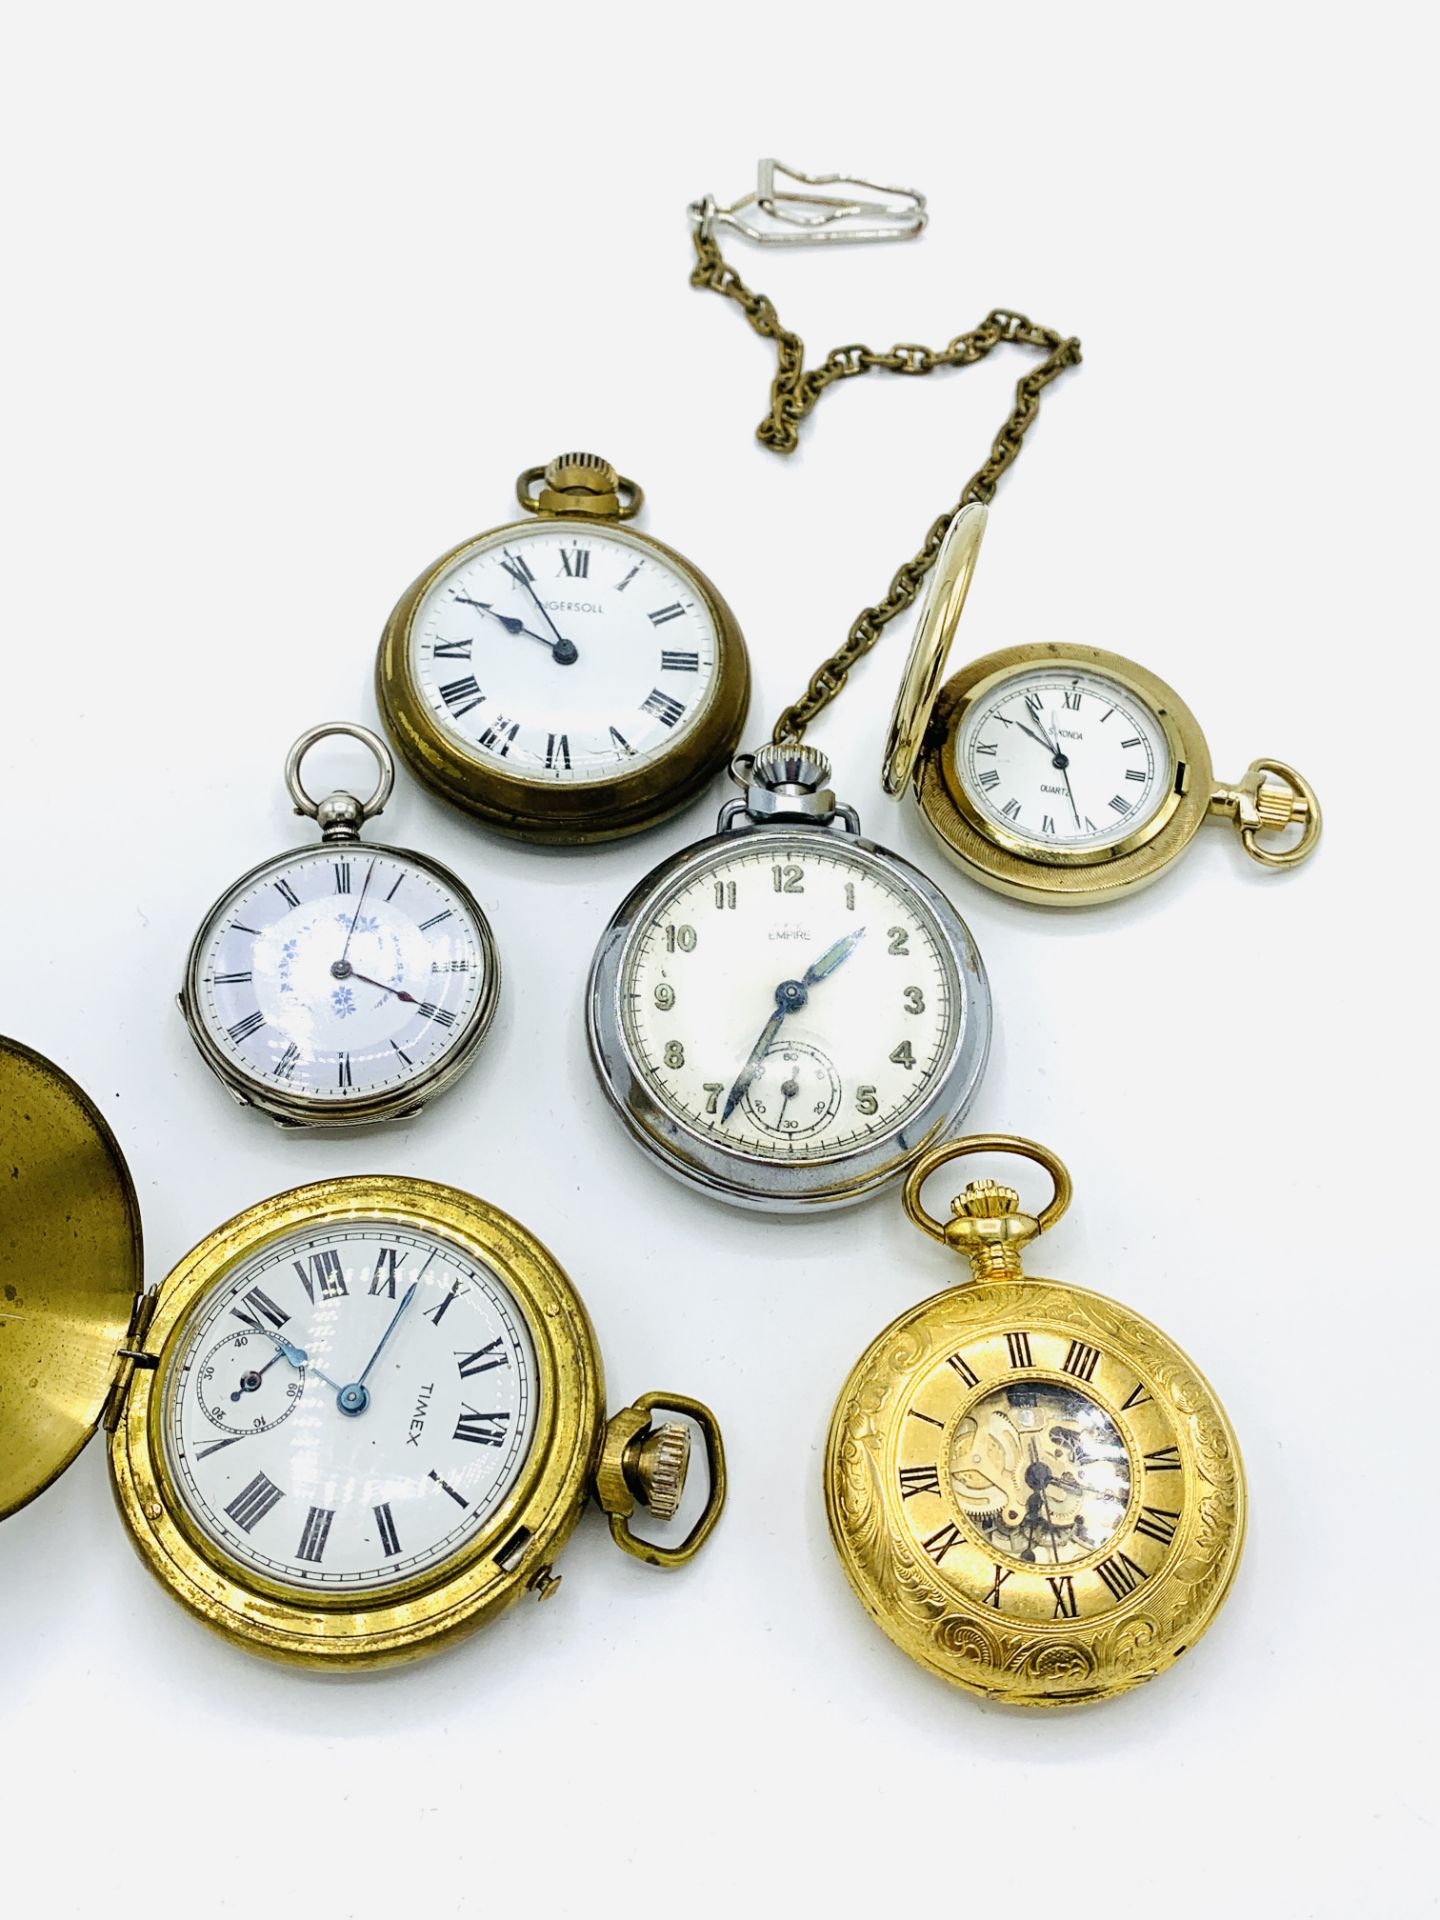 Key wind small pocket watch, case marked 'fine silver', and five other pocket watches.